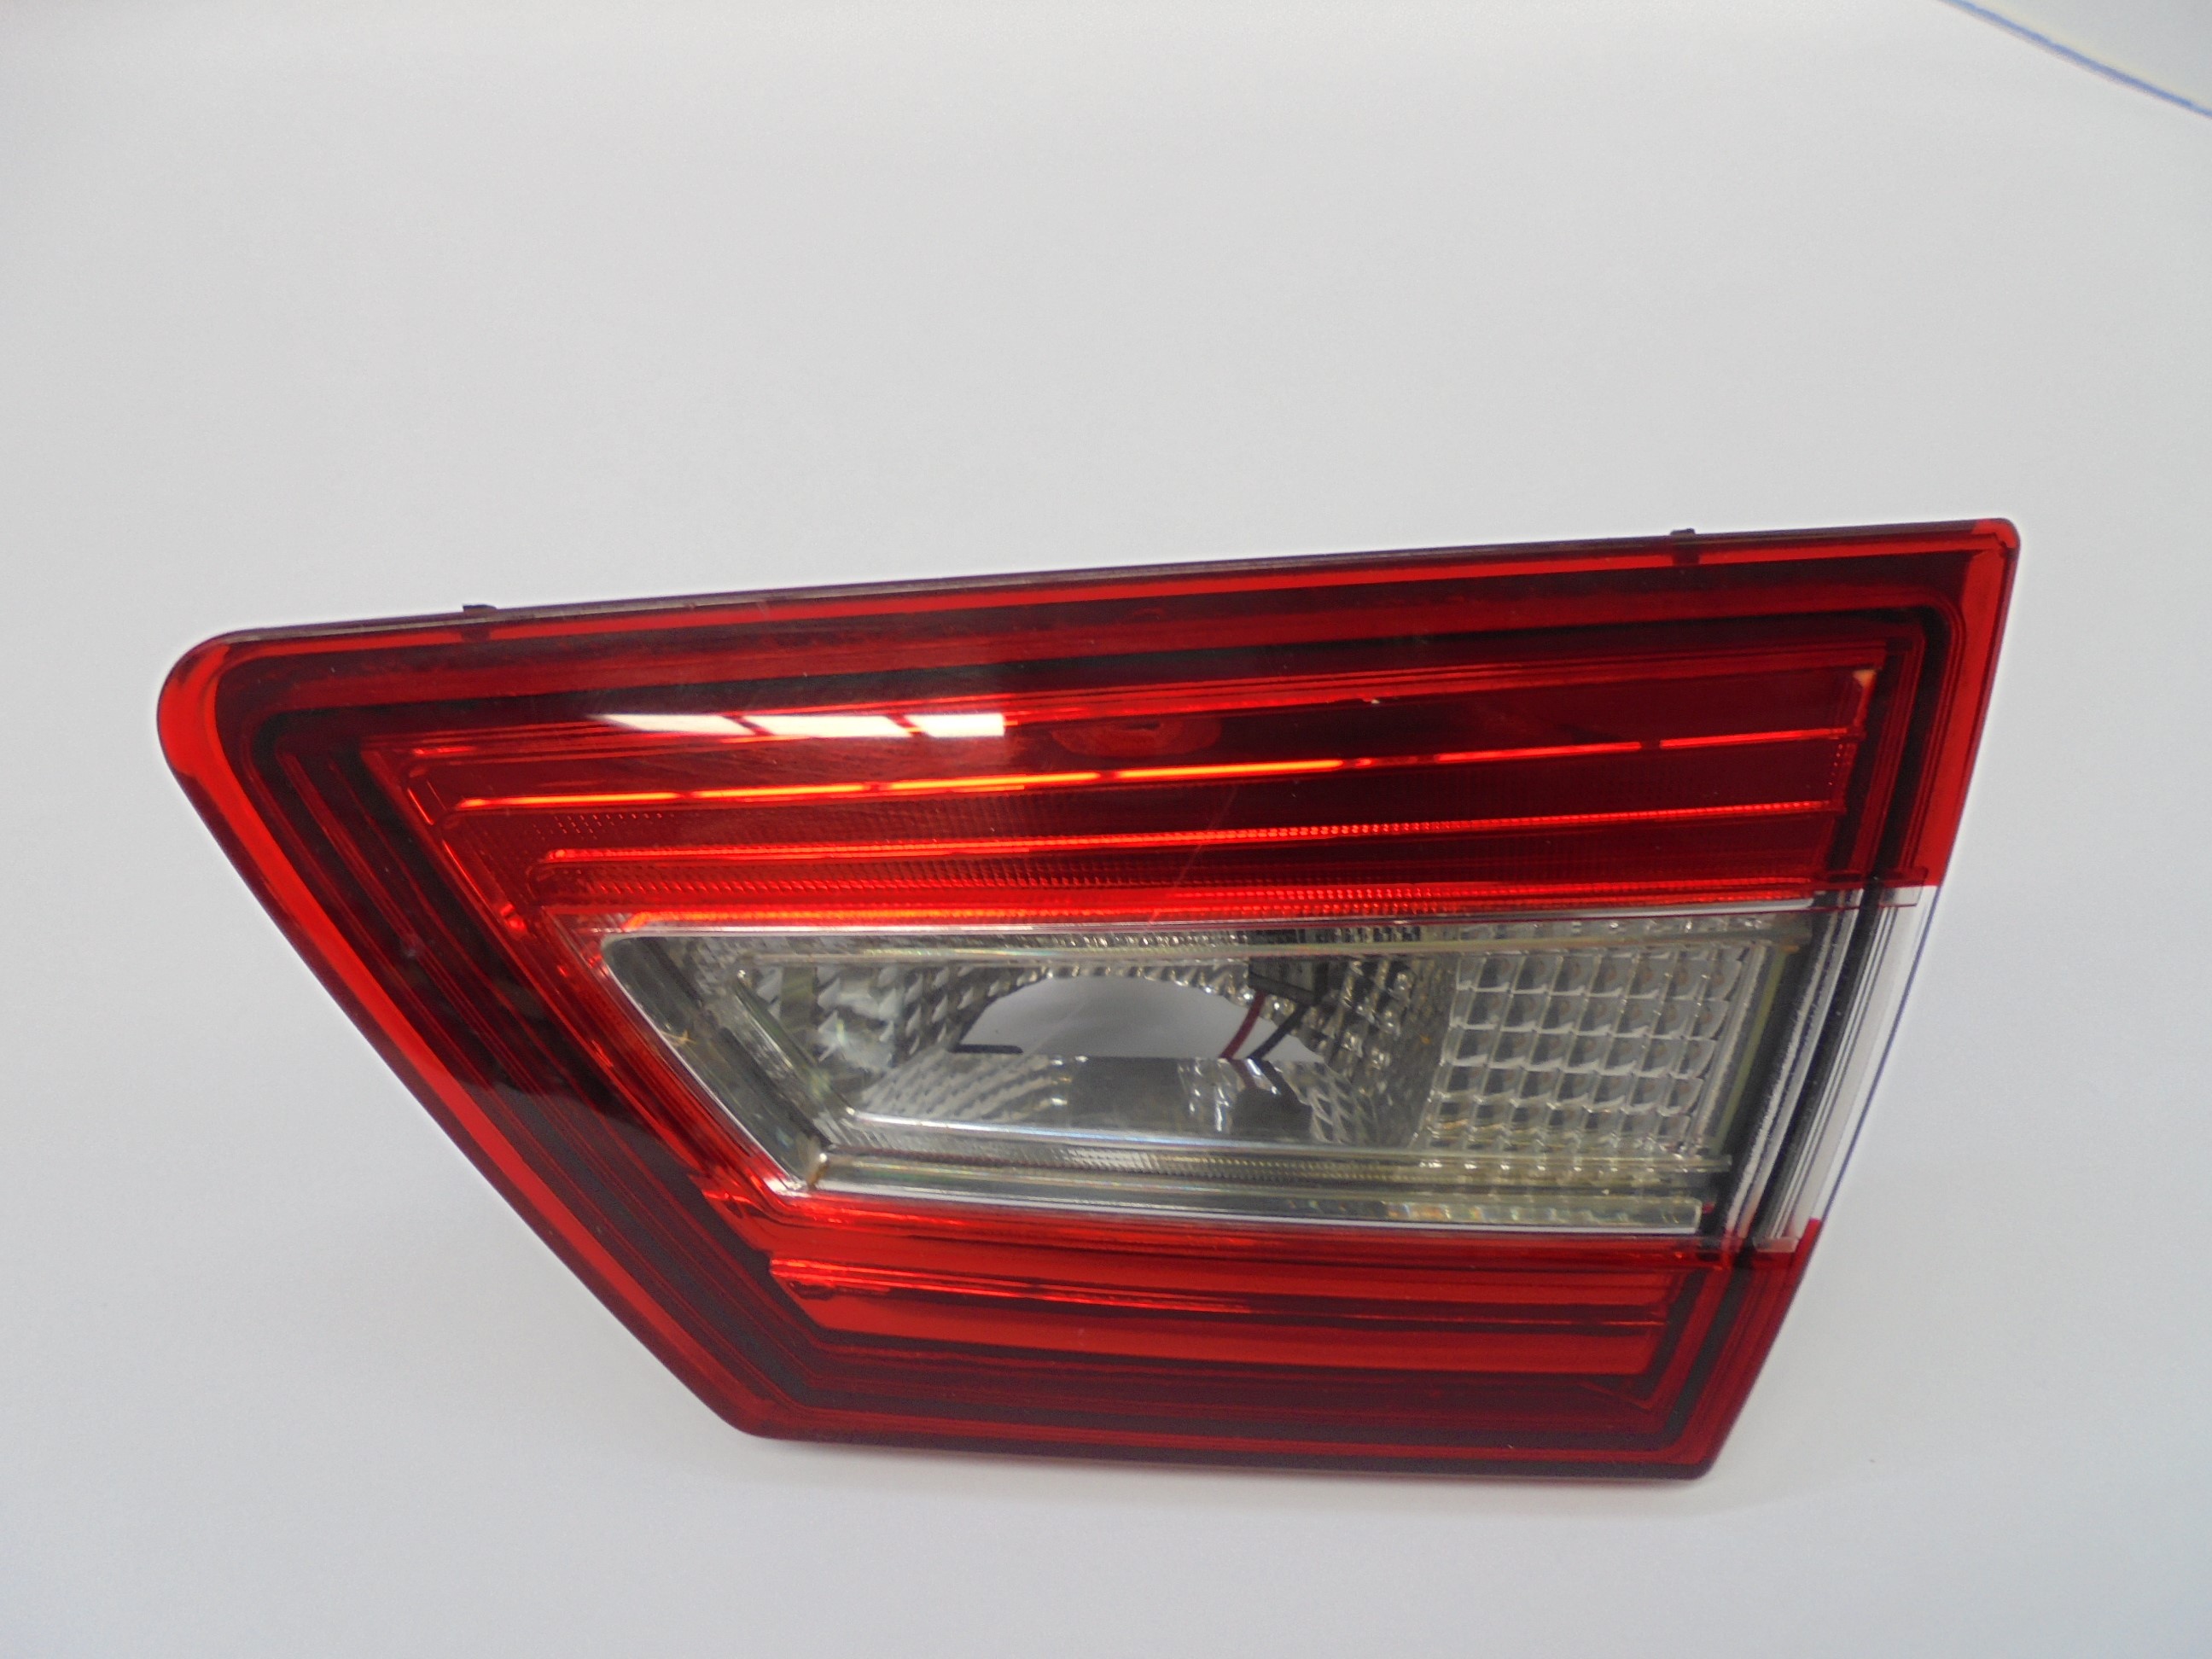 RENAULT Clio 3 generation (2005-2012) Rear Right Taillight Lamp 265505796R 25114547